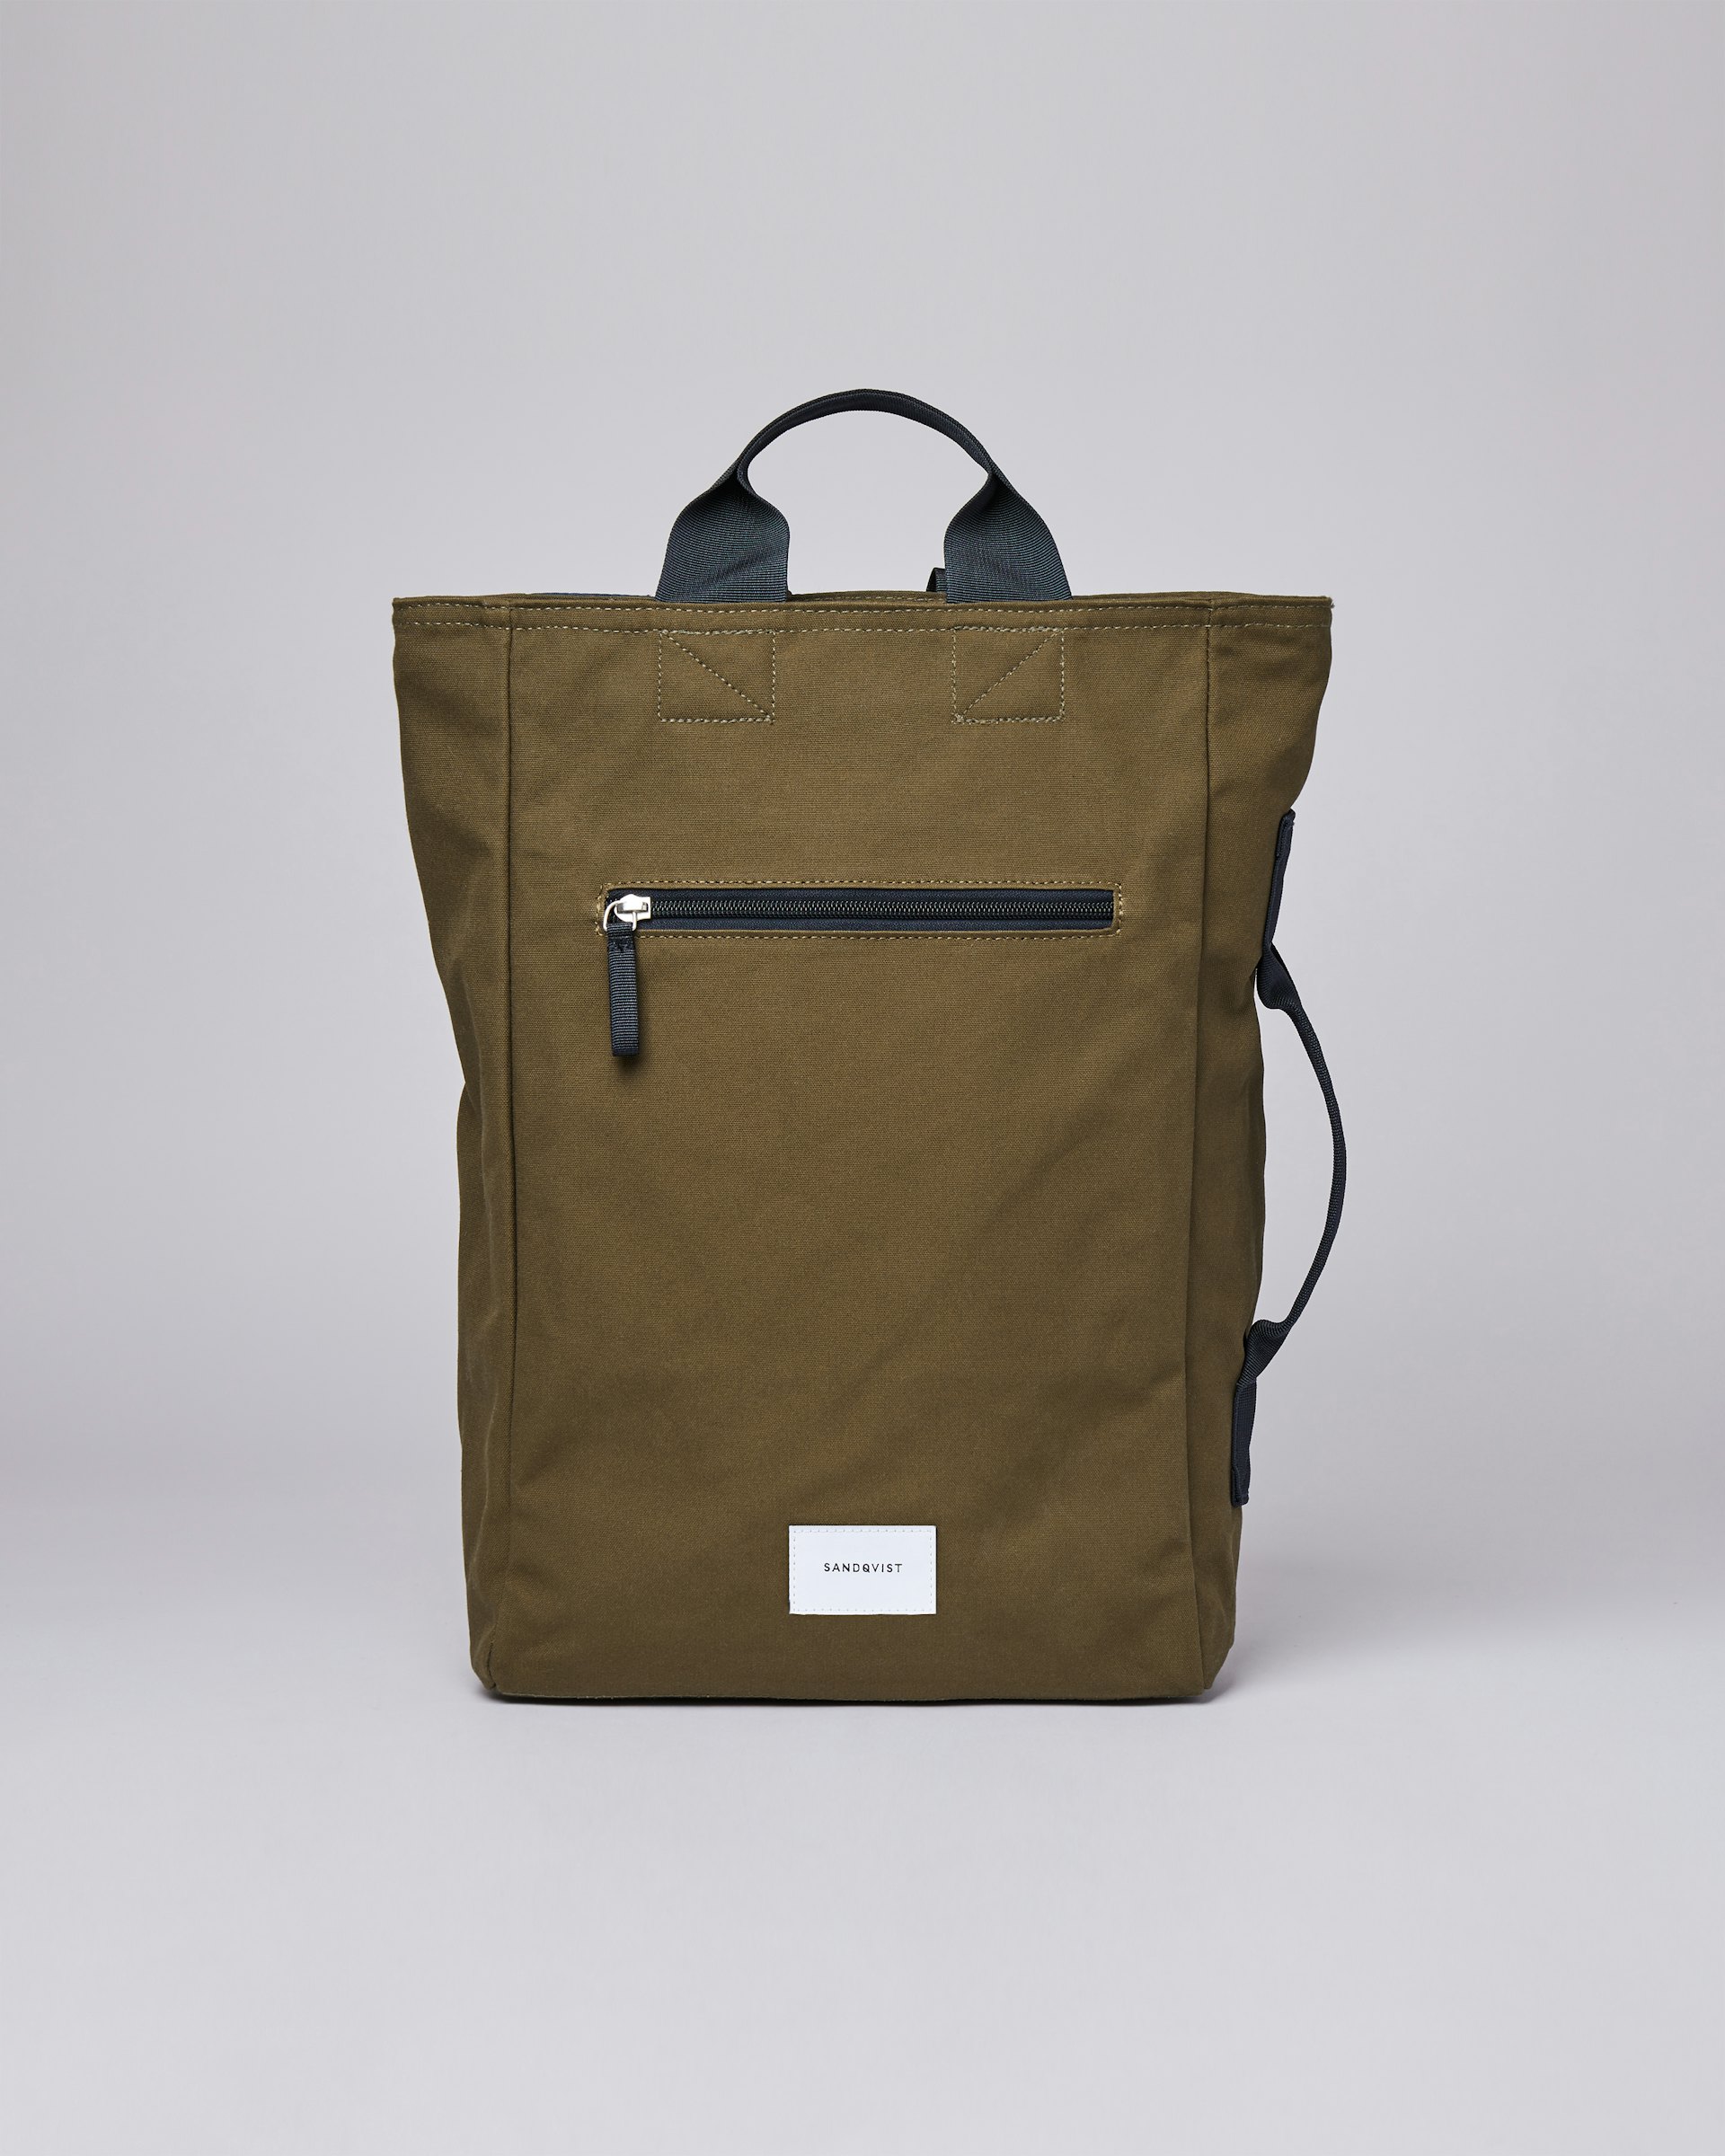 Tony Vegan belongs to the category Backpacks and is in color olive (1 of 4)